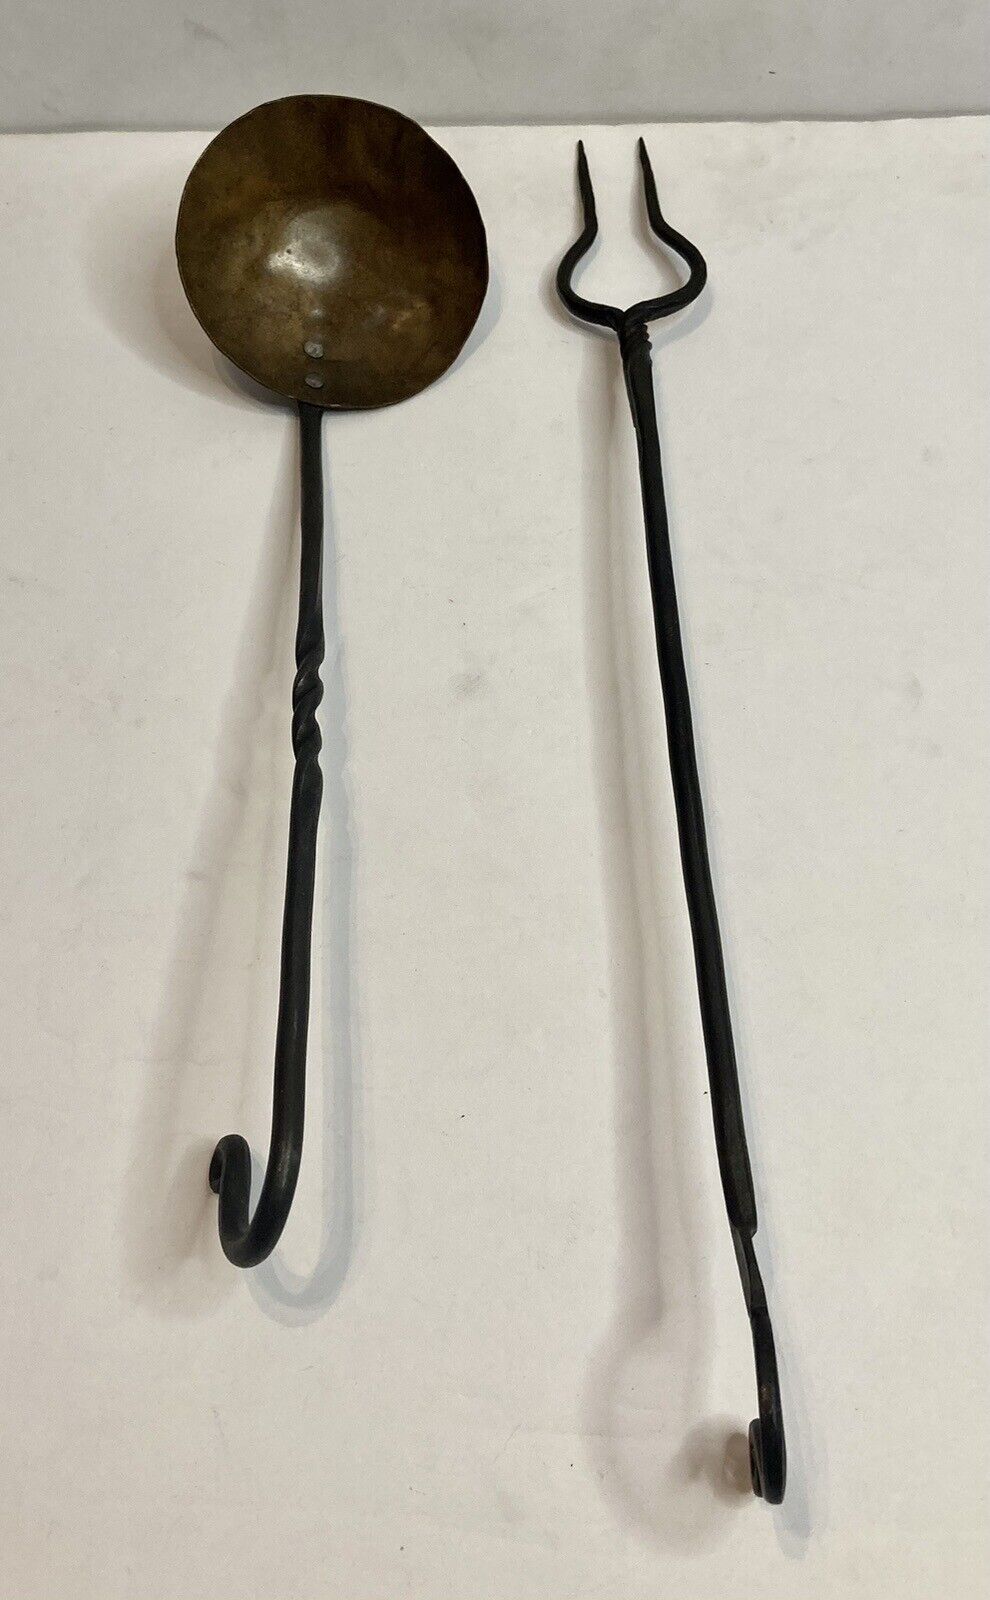 Antique Primitive Early American Wrought Iron Brass Utensils Ladle Fork Numbered